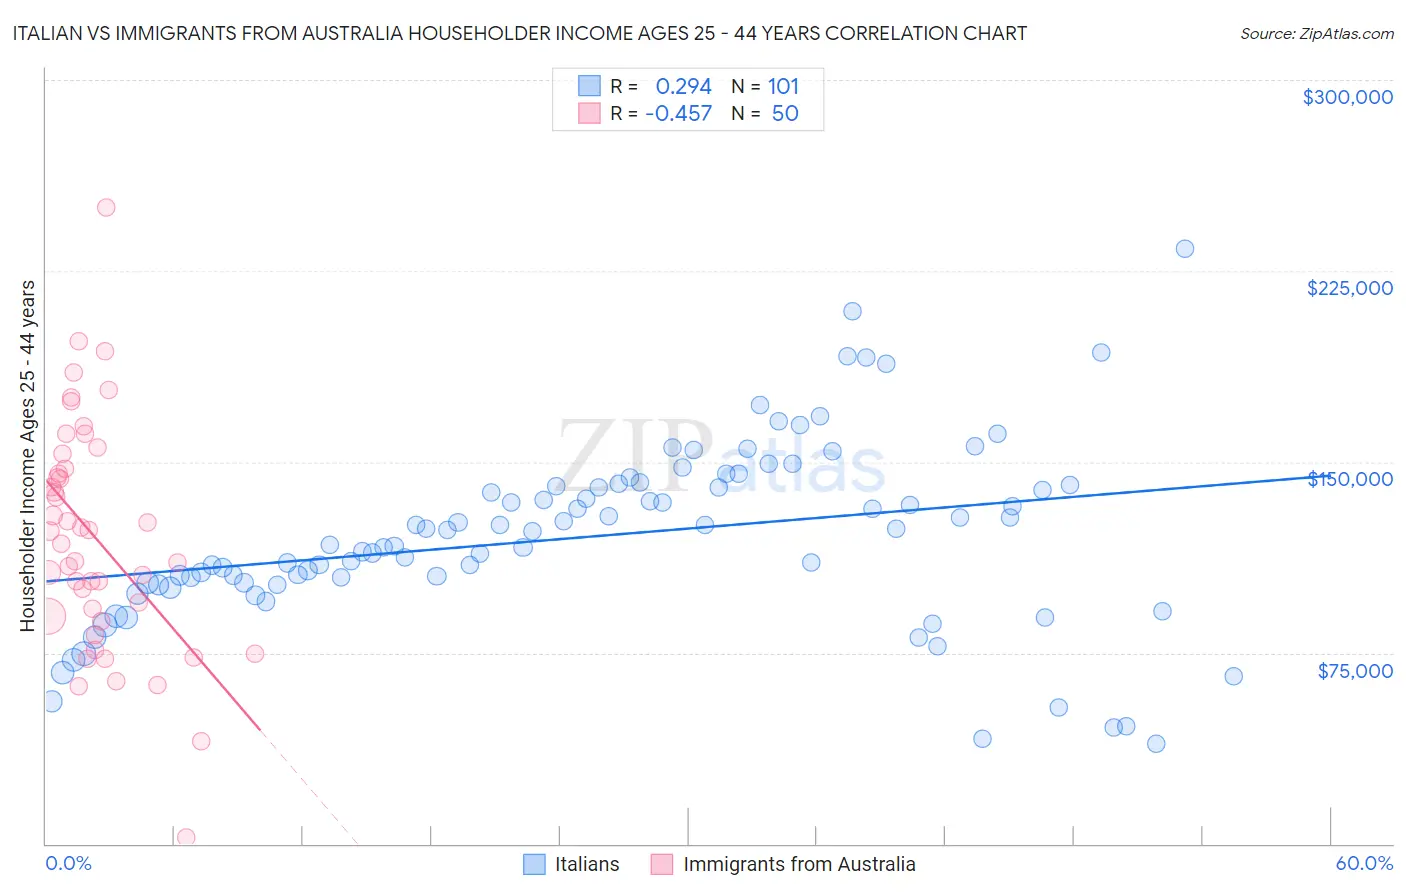 Italian vs Immigrants from Australia Householder Income Ages 25 - 44 years